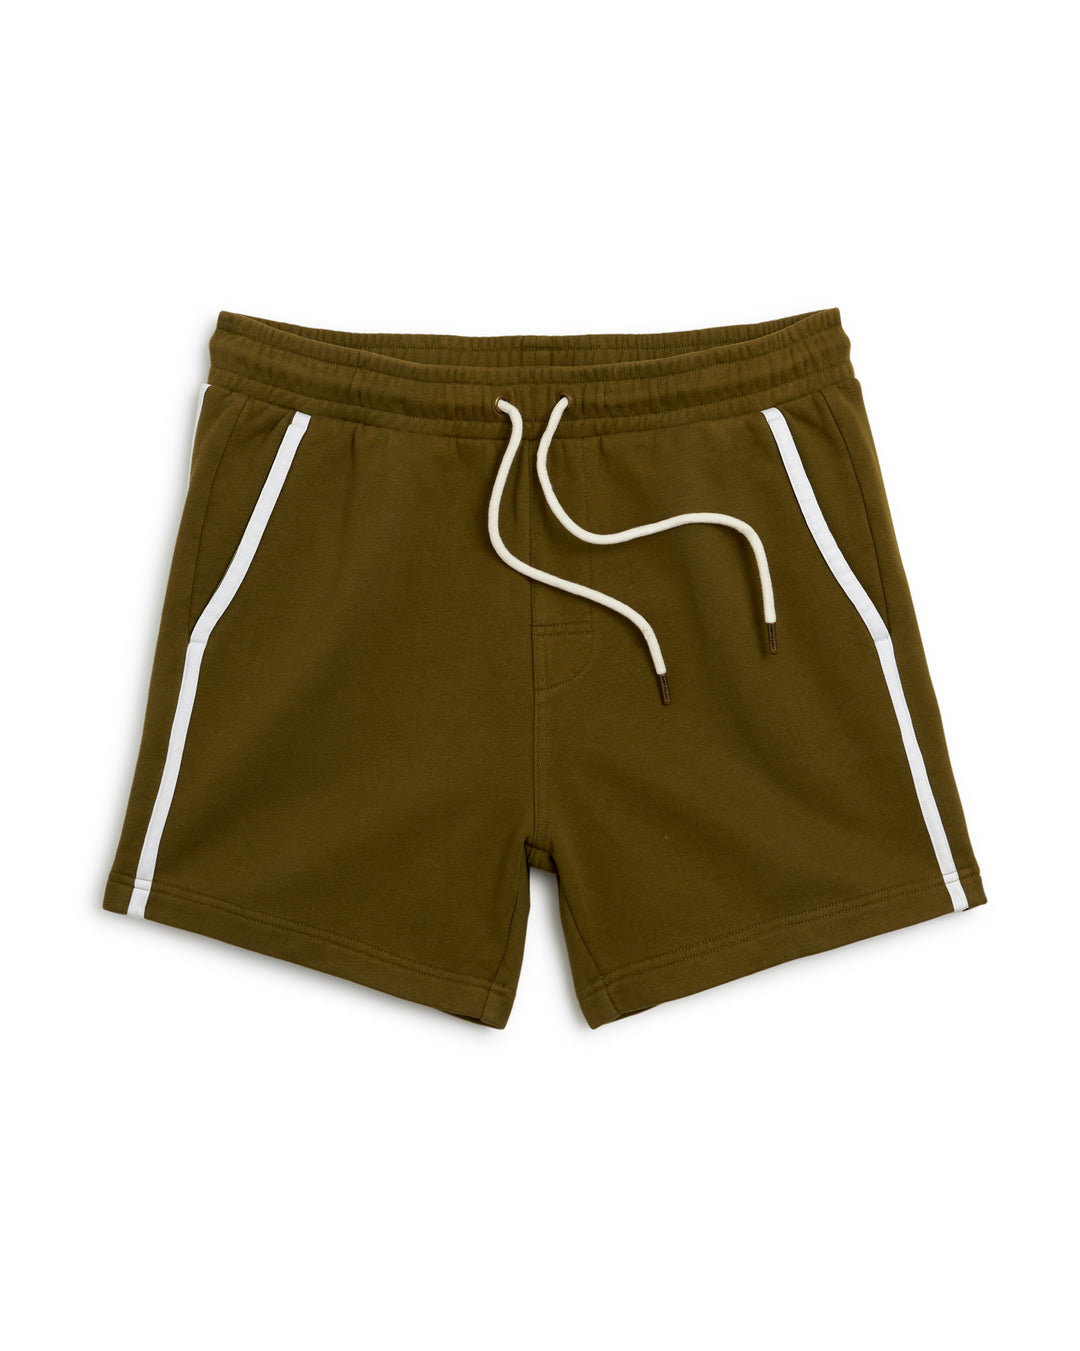 The Dandy Del Mar Marseille Short - Arbequina in olive green with white stripes is perfect for both athletics and leisure activities.